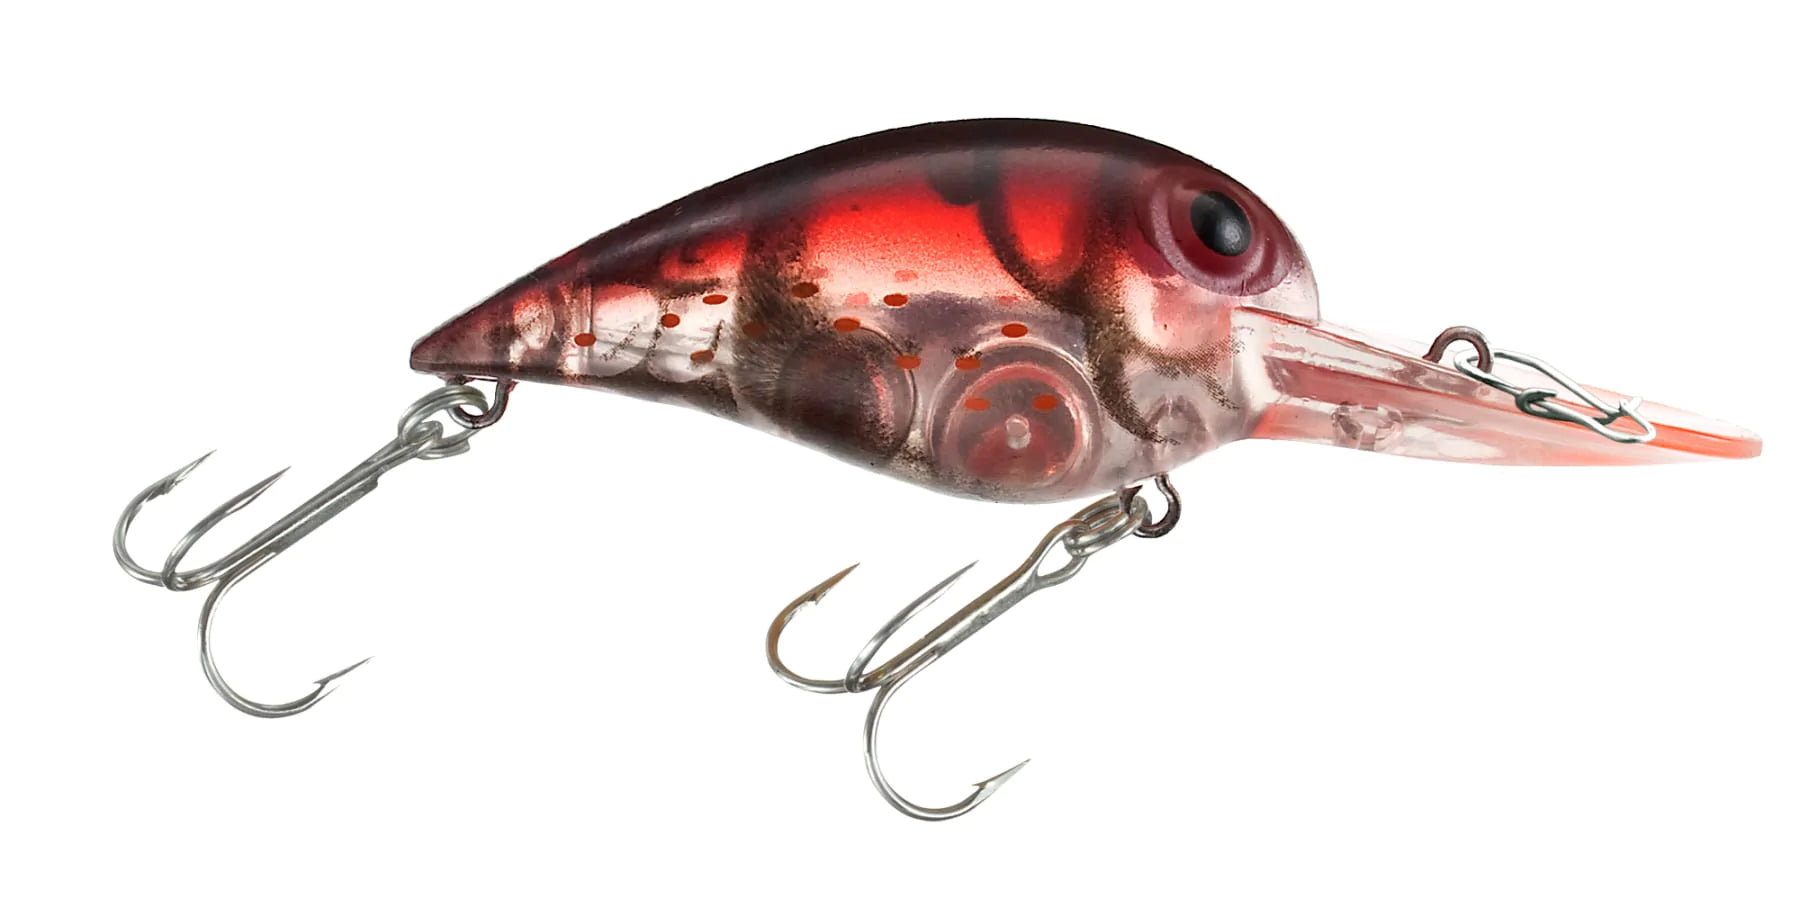 S8 storm sub wa-toSTORM SUB WART approximately 40mm Crank Bait Surf .s:  Real Yahoo auction salling